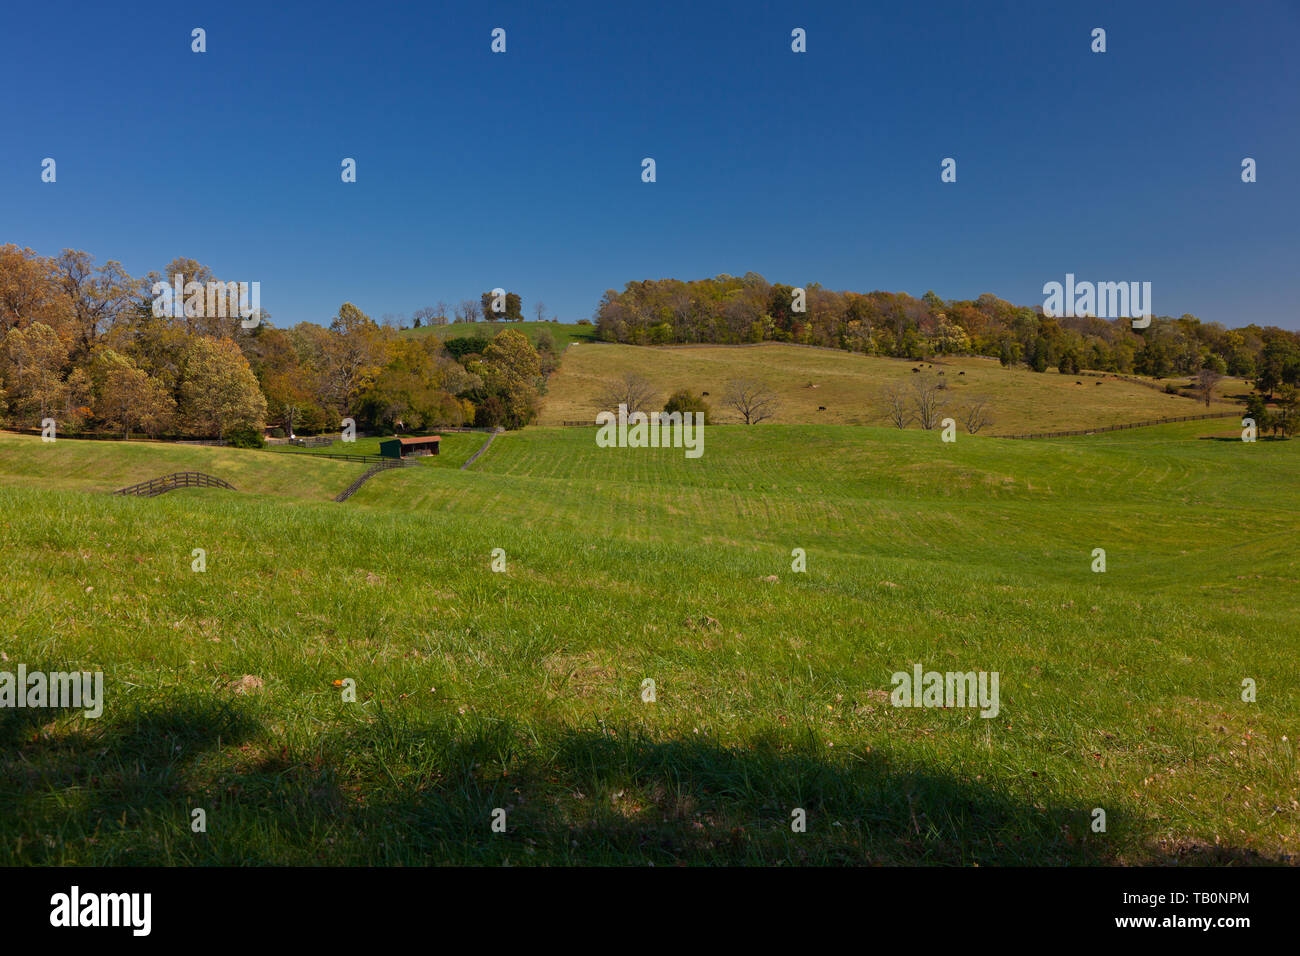 Shed amongst the rolling hills, green fields and clear blue skies Stock Photo